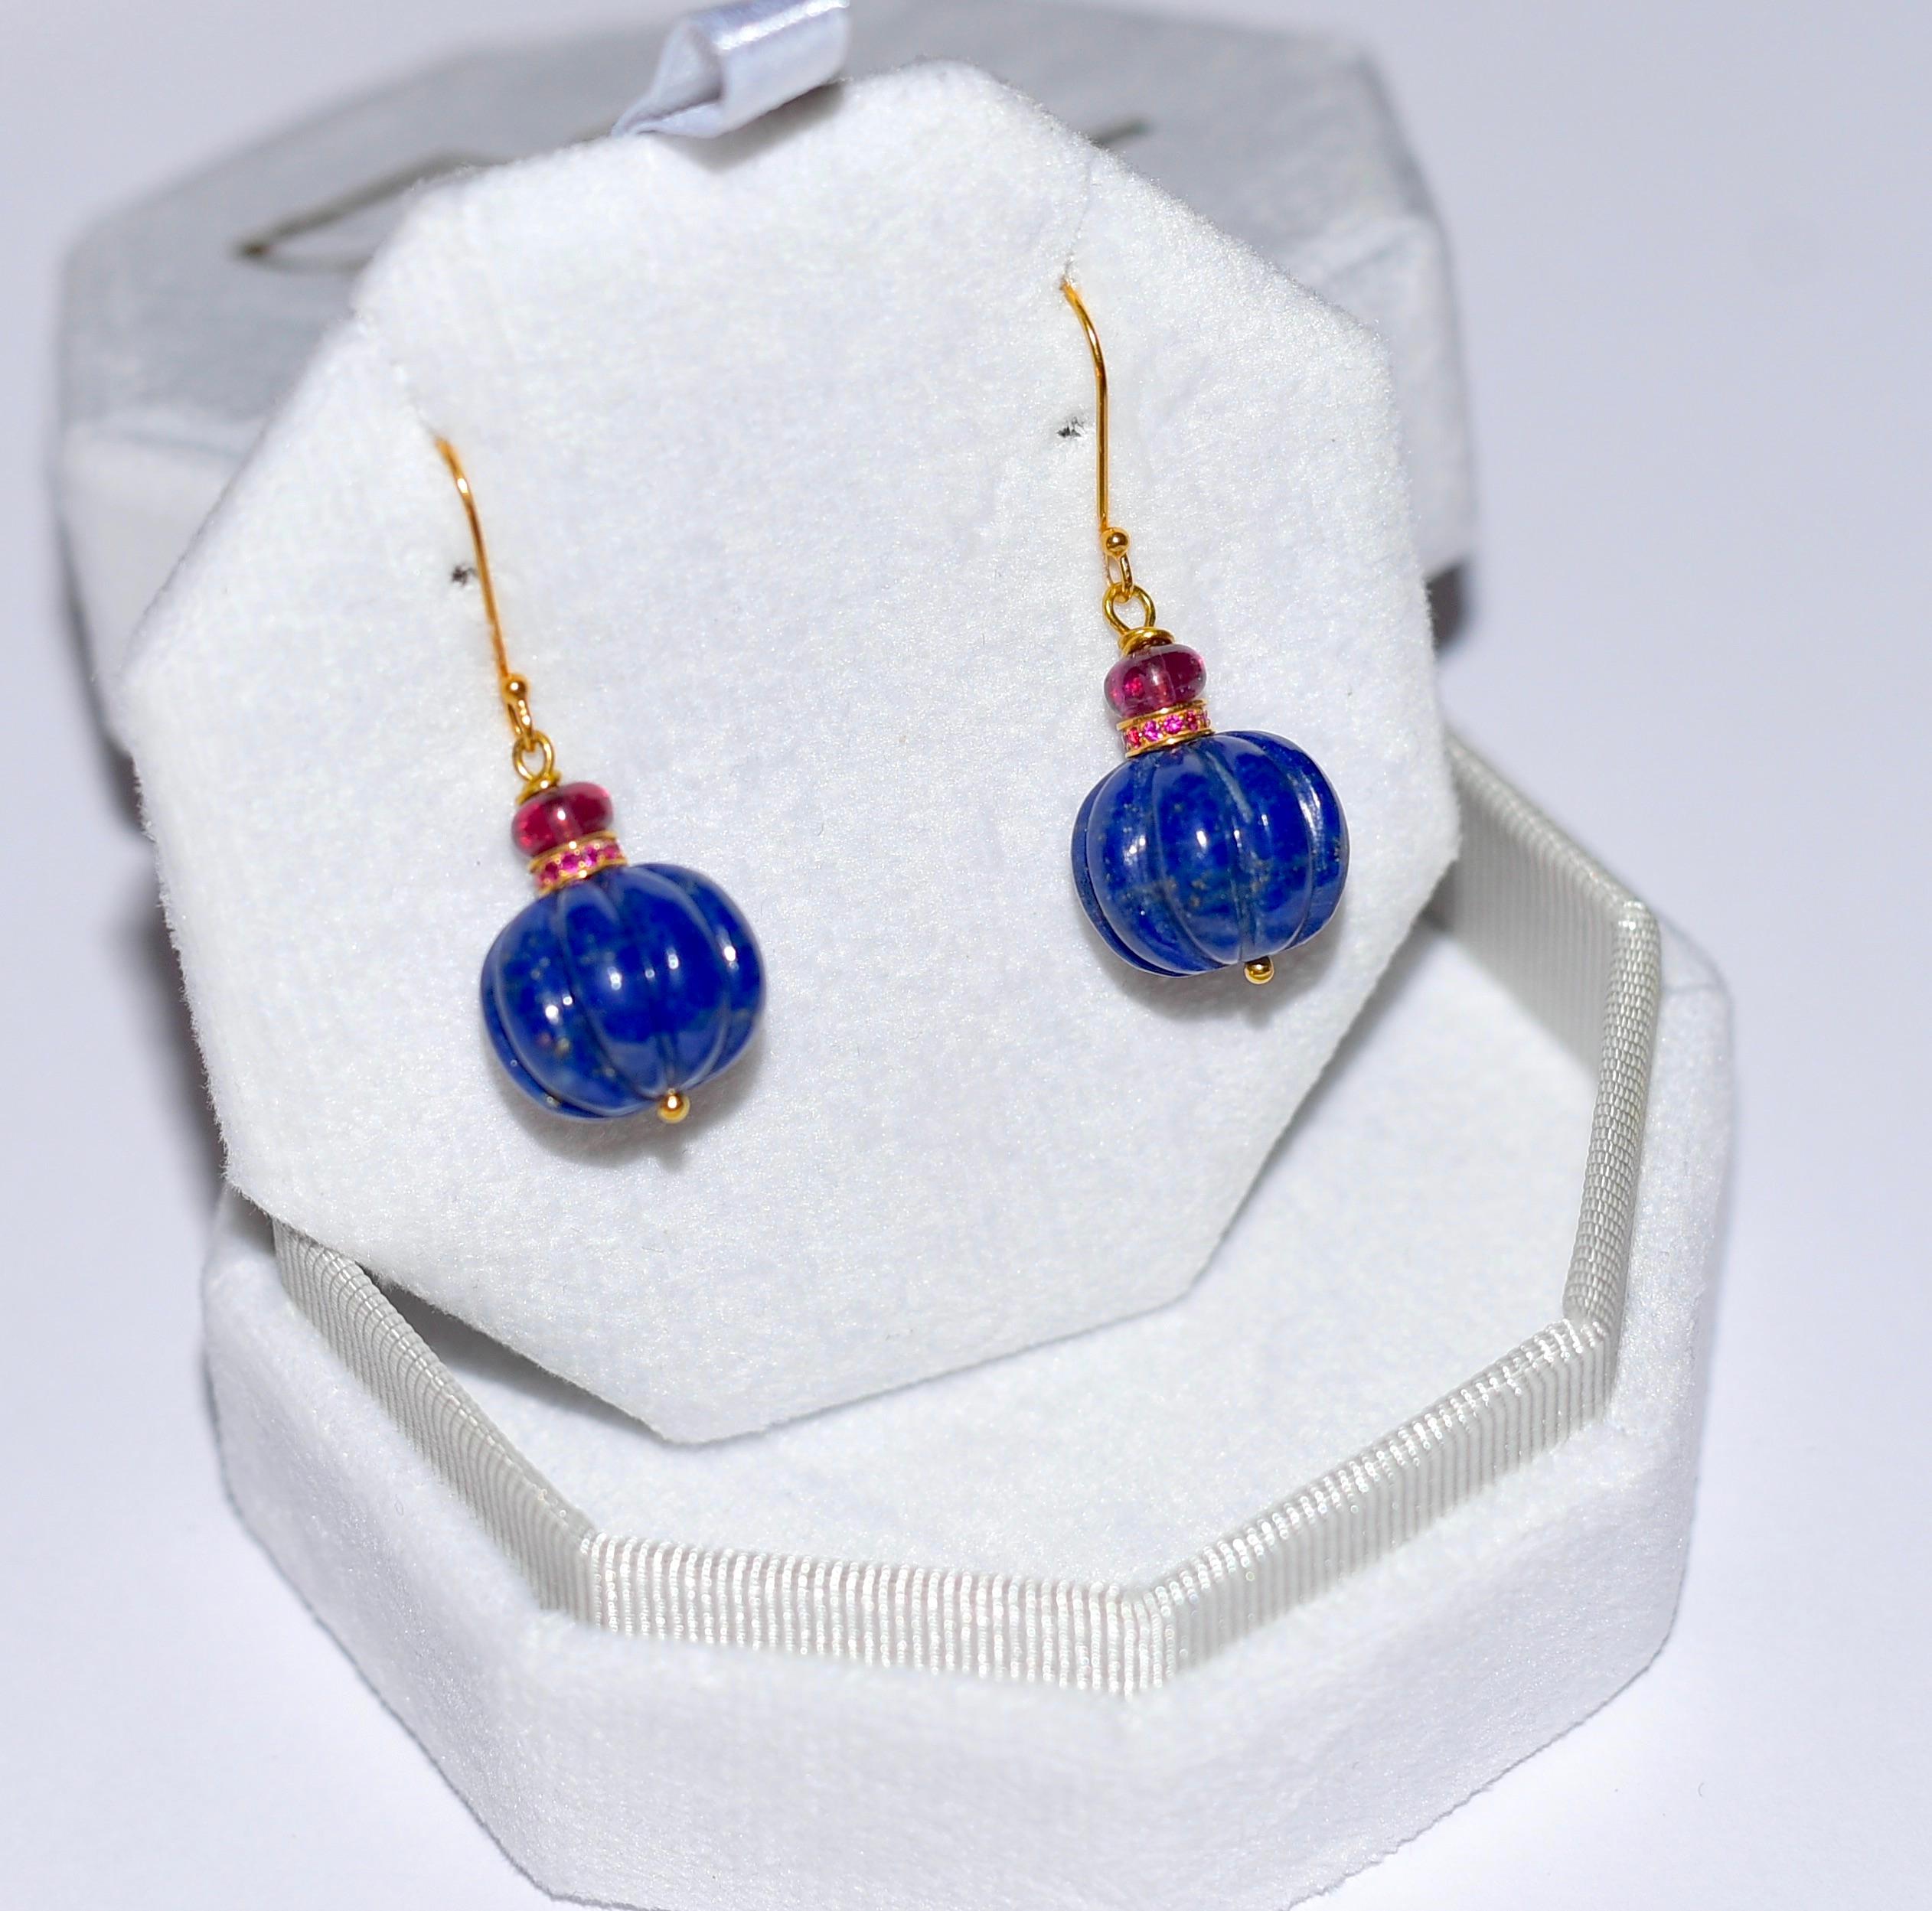 These precious earrings were created from Afghani Lapis Lazuli (14mm)  and look at the fun part because they look like melons! The earring strikes a special shine with genuine 18K Solid yellow Gold eternity beads and 4mm Ruby beads.
Beautiful piece